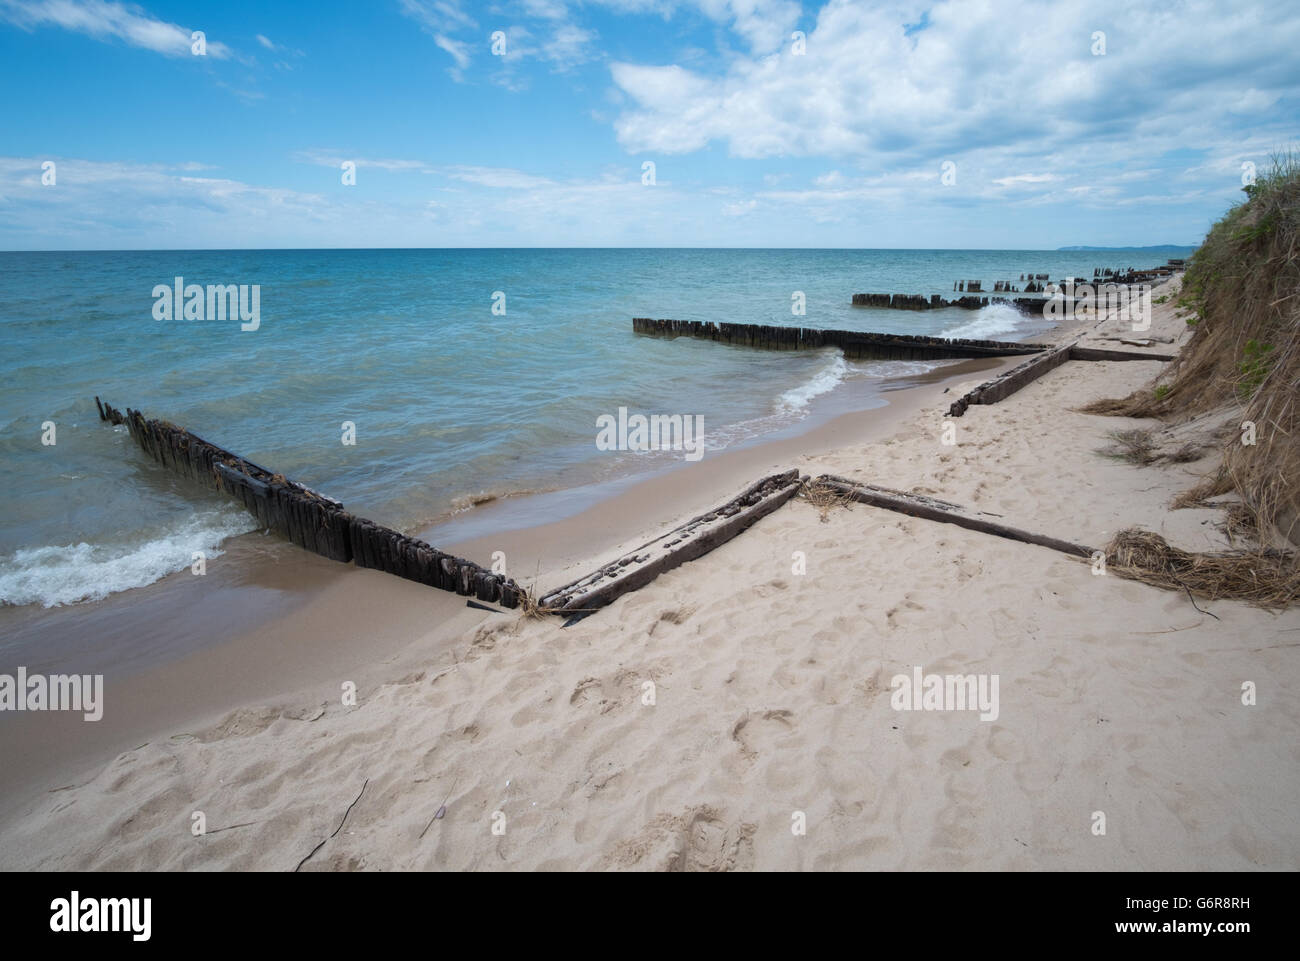 Remains of a shipping dock left over from the lumbering days of the early 1900s on the shore of Lake Michigan Stock Photo